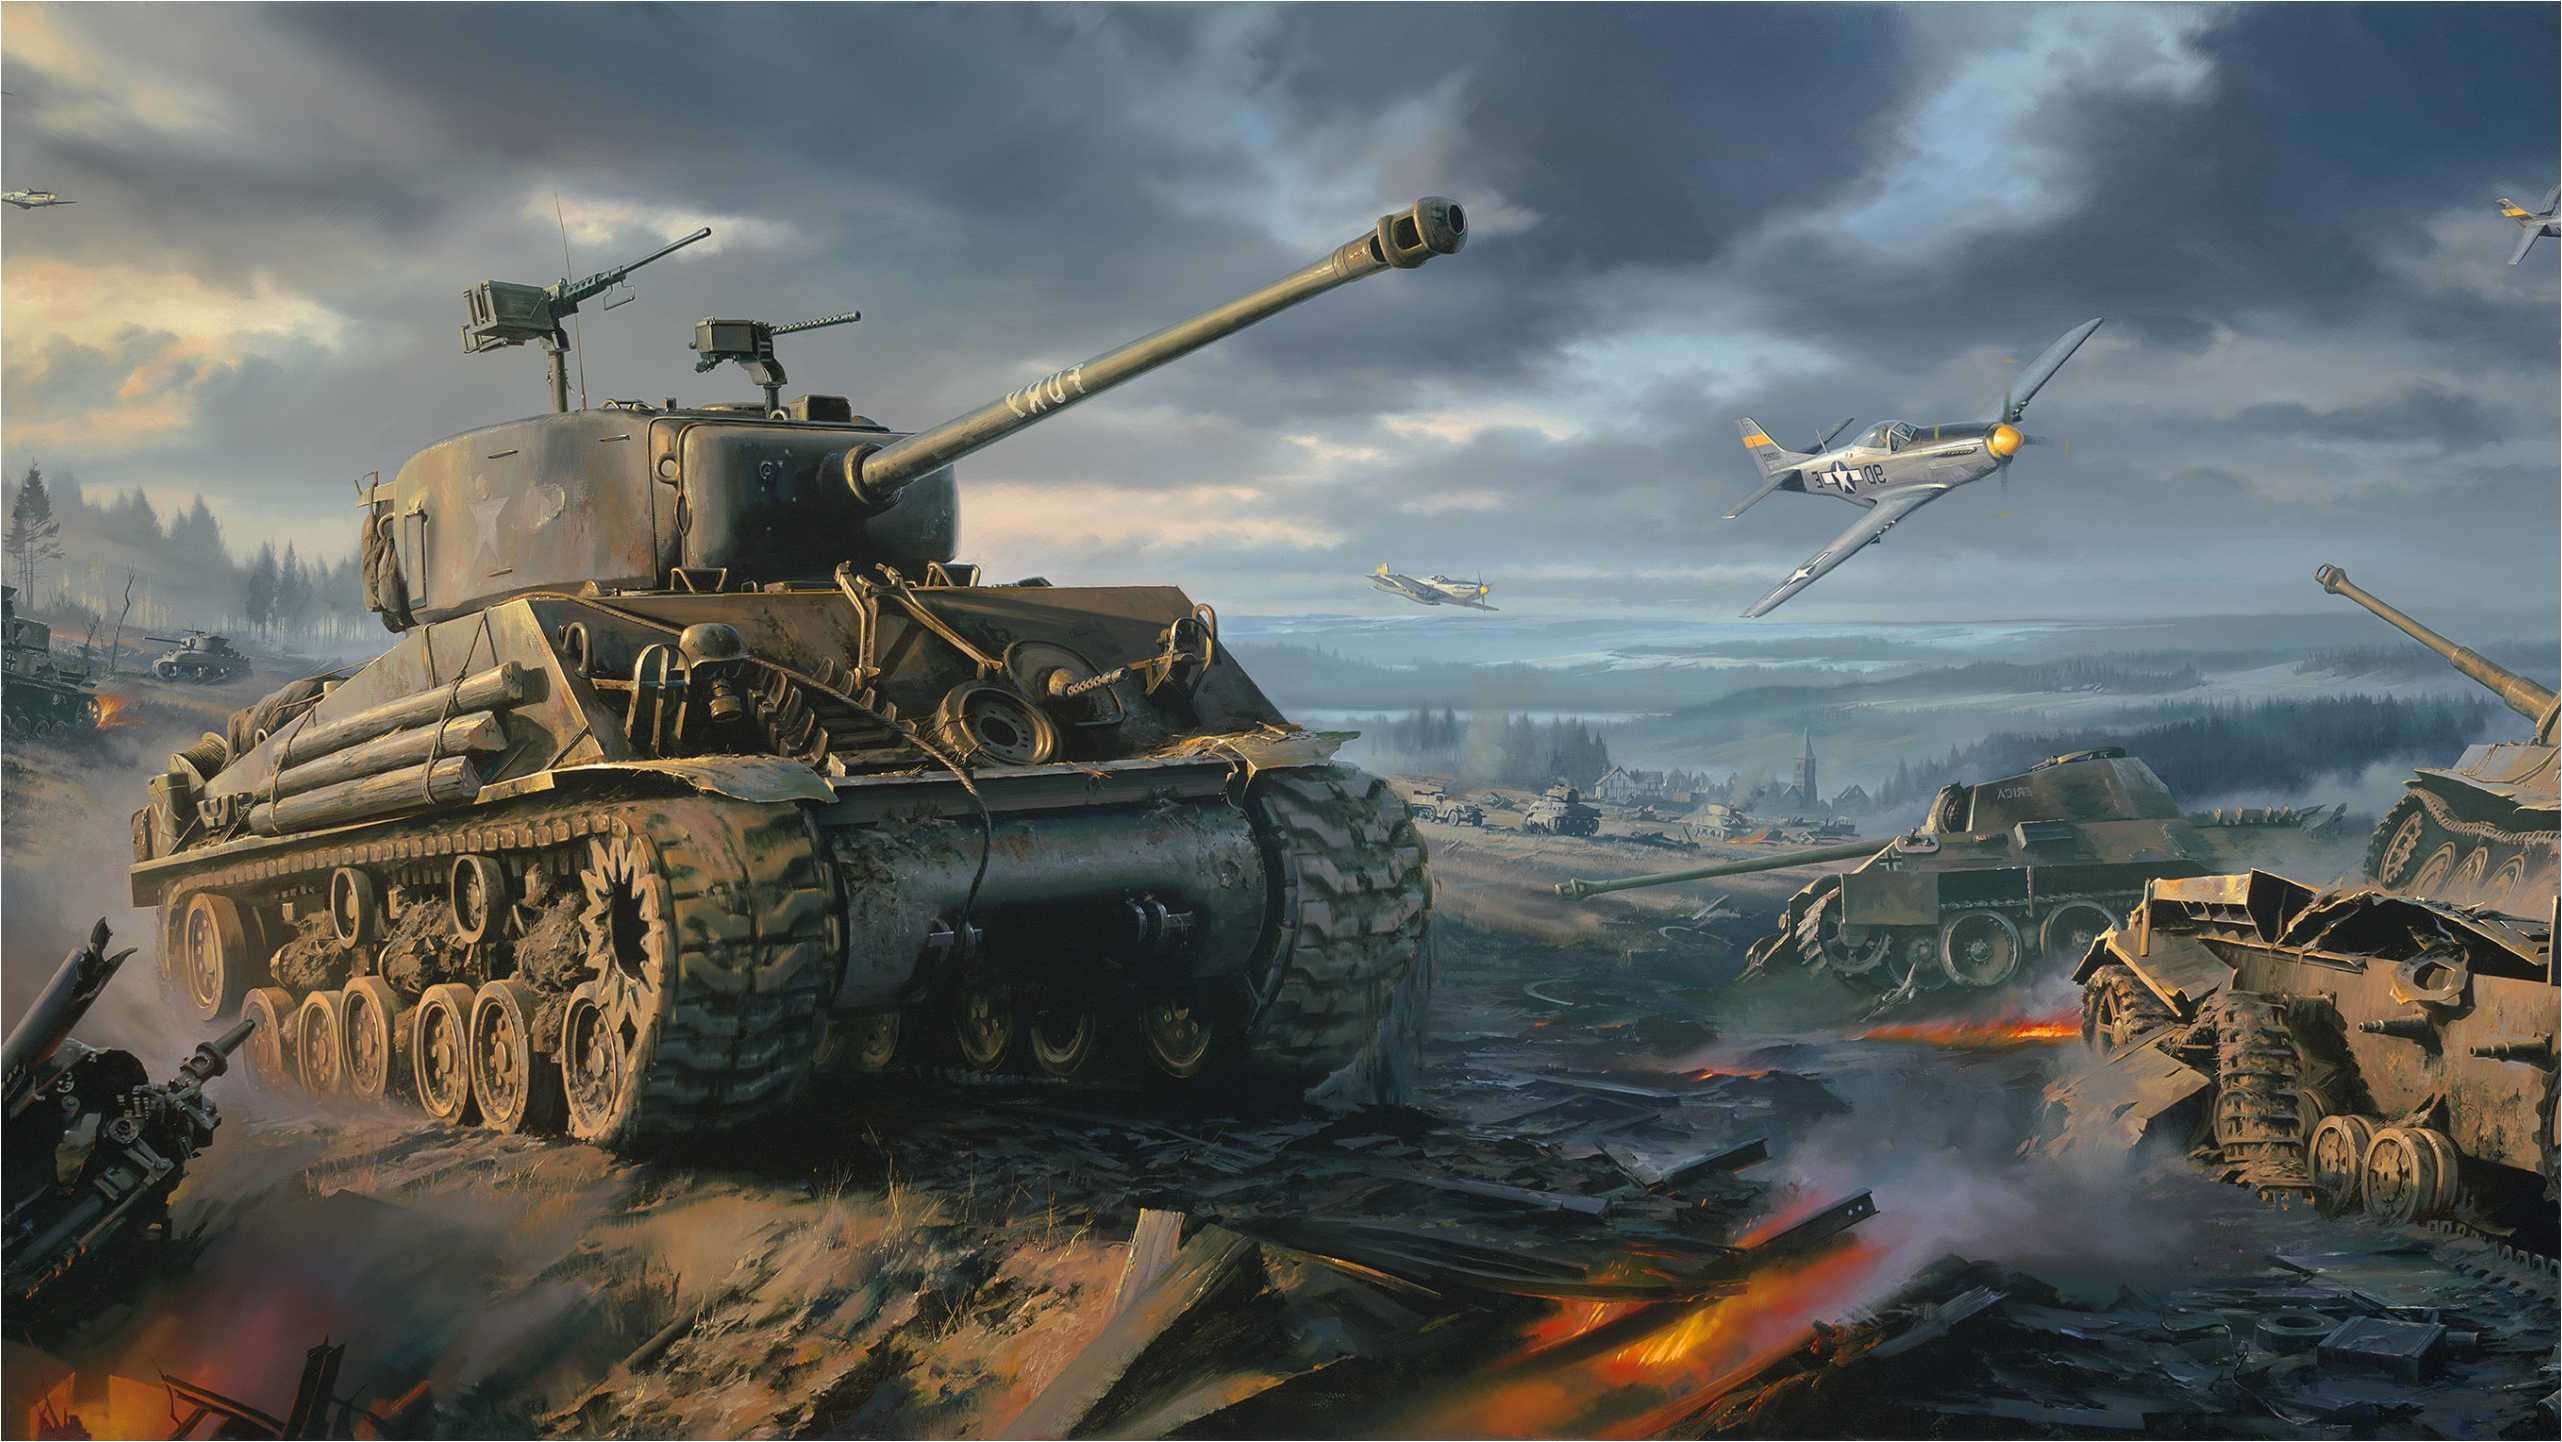 2562x1442 Ww2 Wallpapers, Collection of Ww2 Backgrounds, Ww2 FHDQ Wallpapers